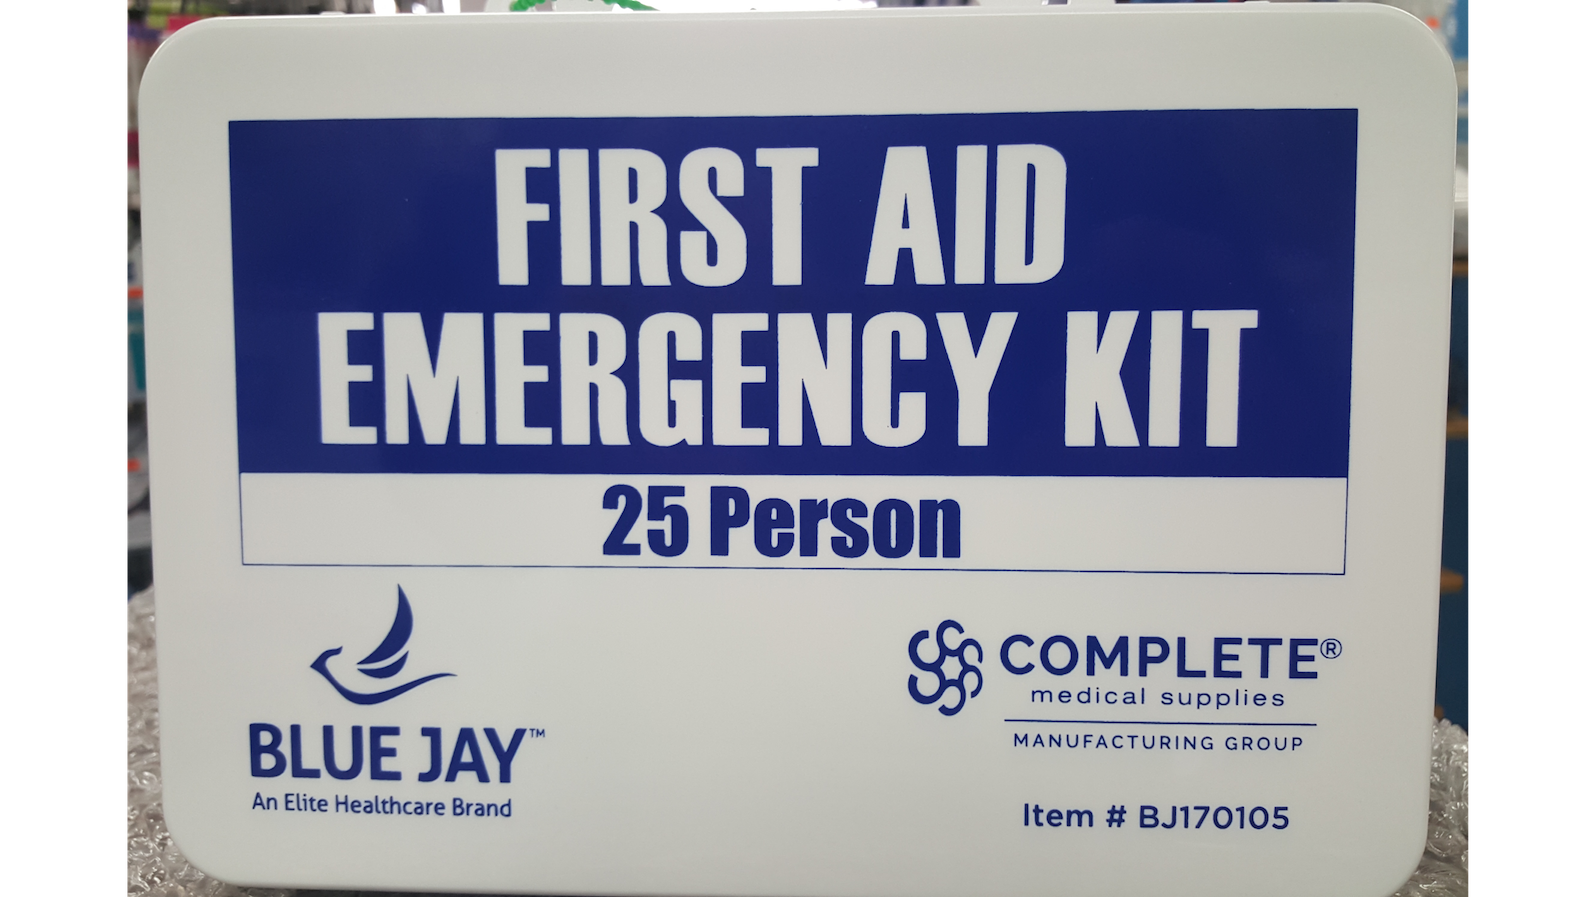 Wishing Well Medical | First Aid | 25 Person Emergency Kit